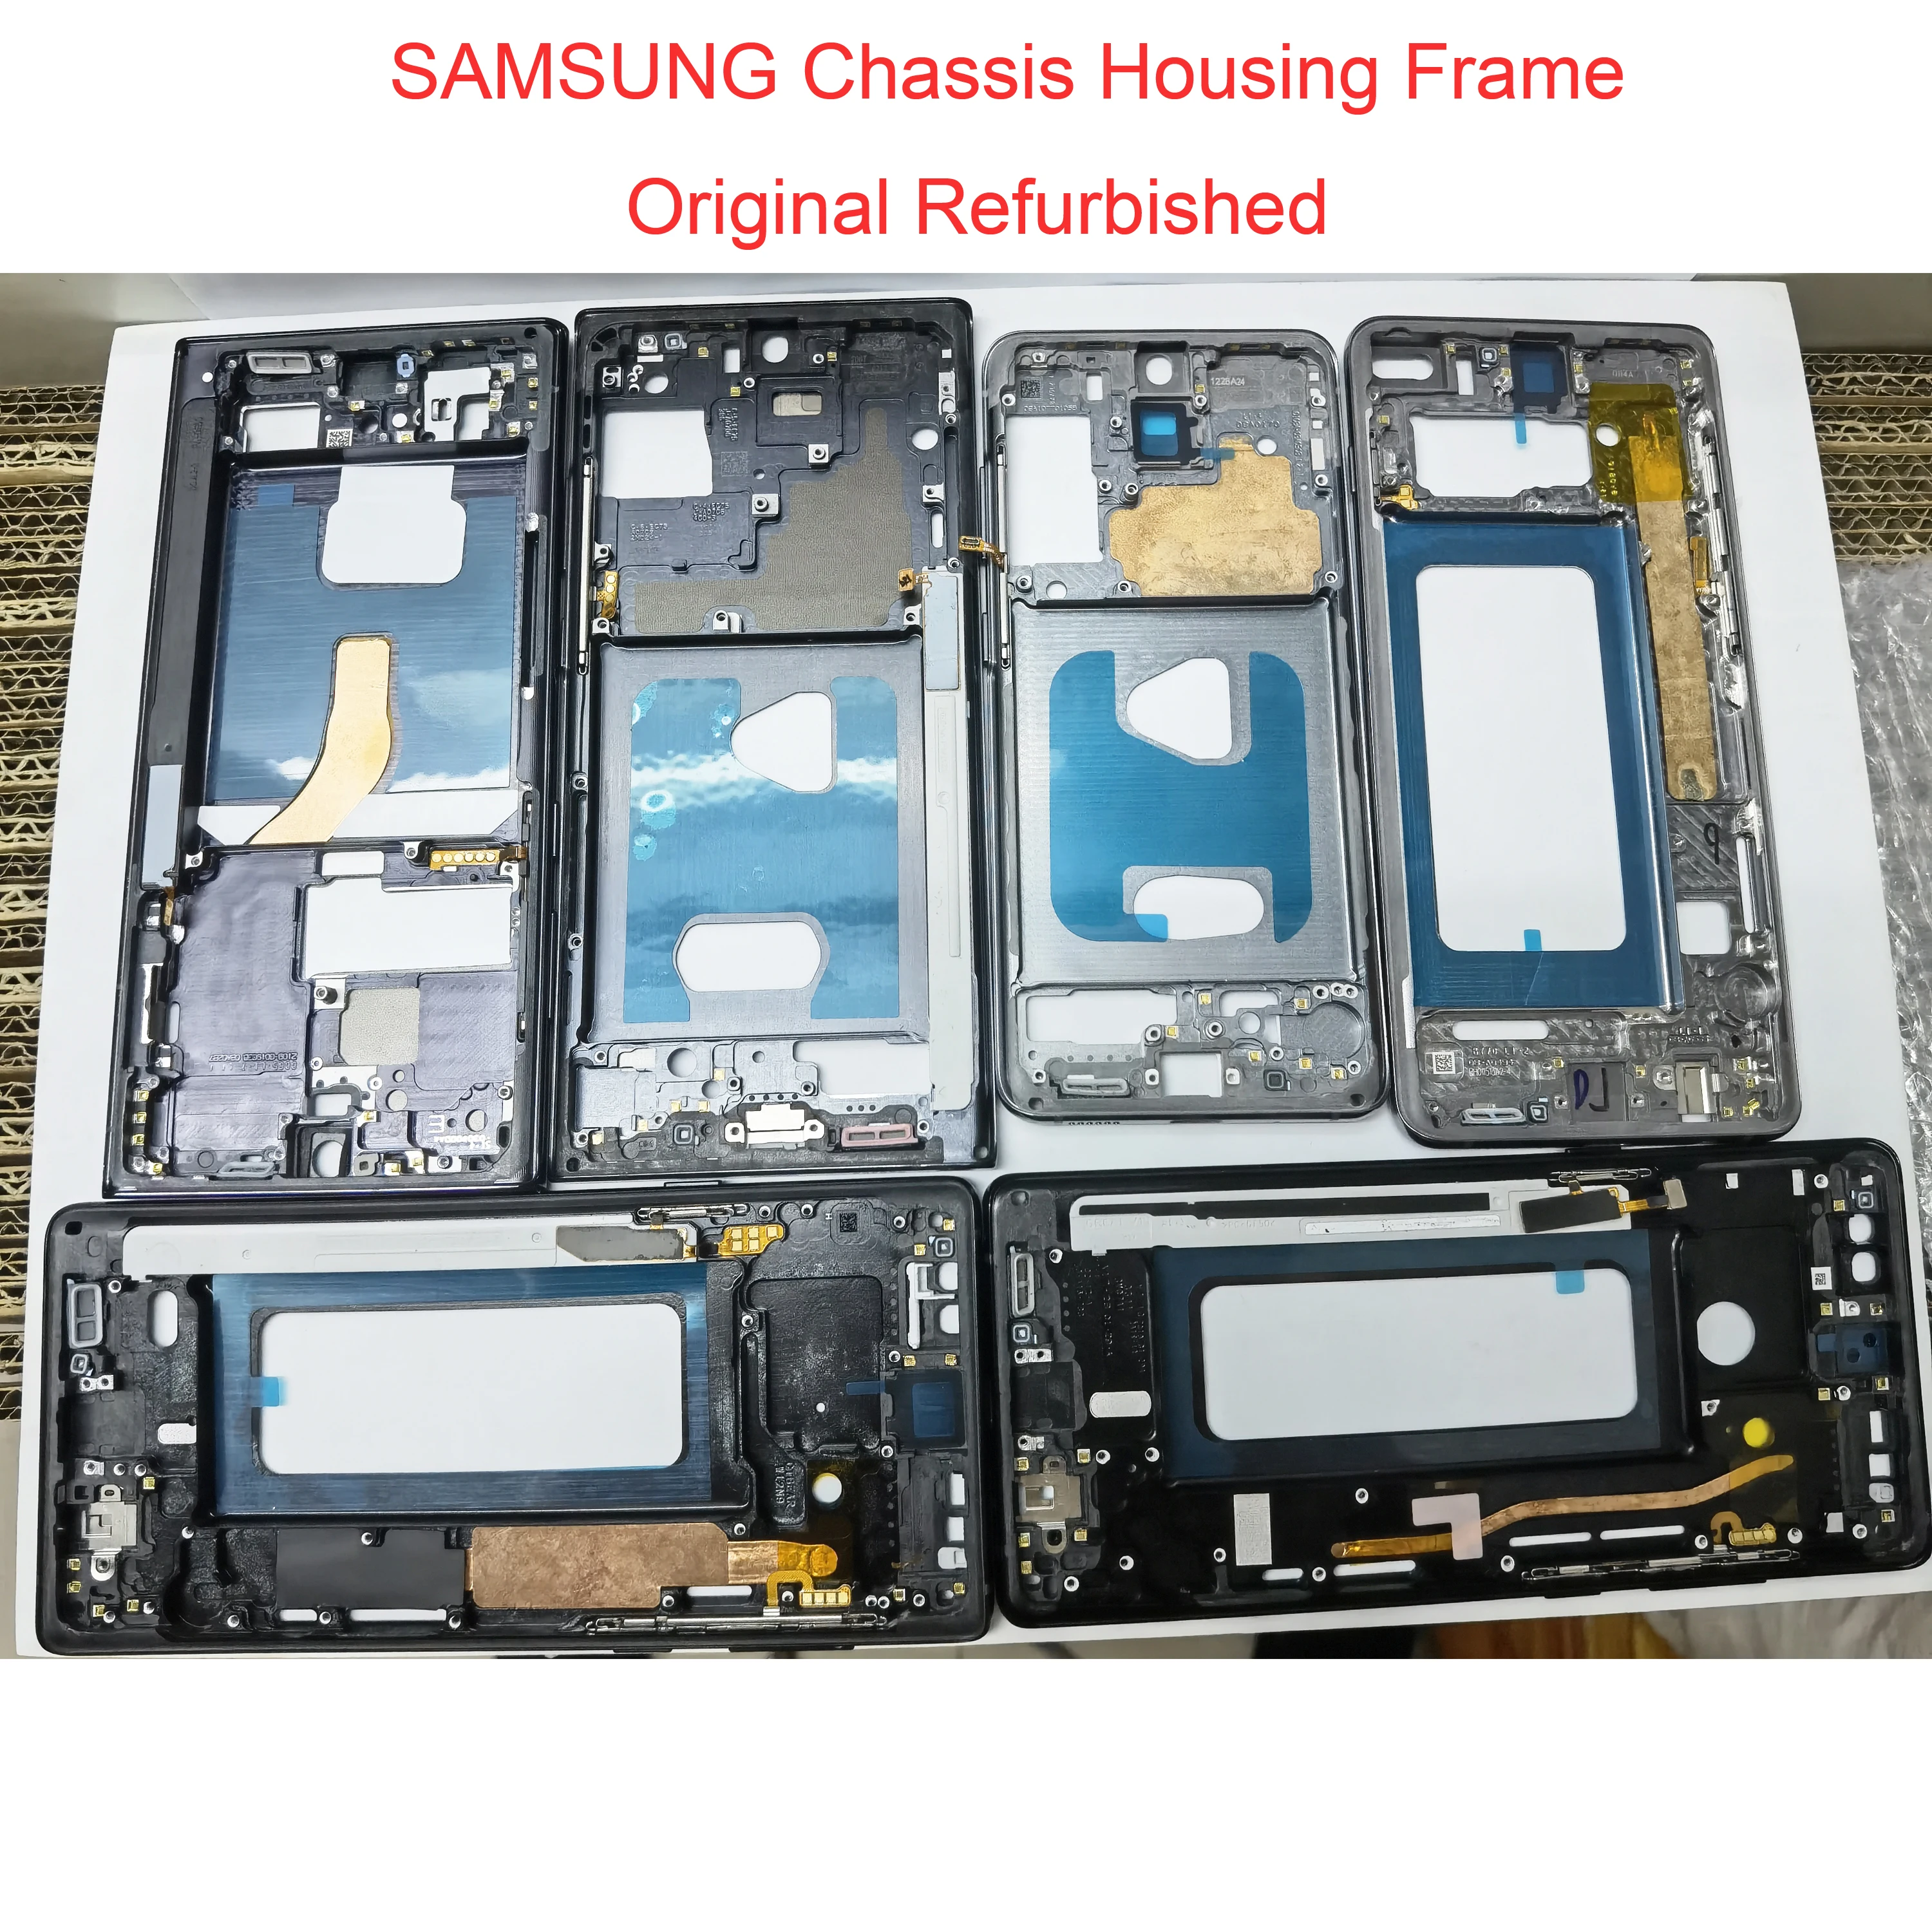  Mobile Phone Replacement Spare Parts for Xiaomi 12S Ultra Front  Housing LCD Frame Bezel Plate : Cell Phones & Accessories